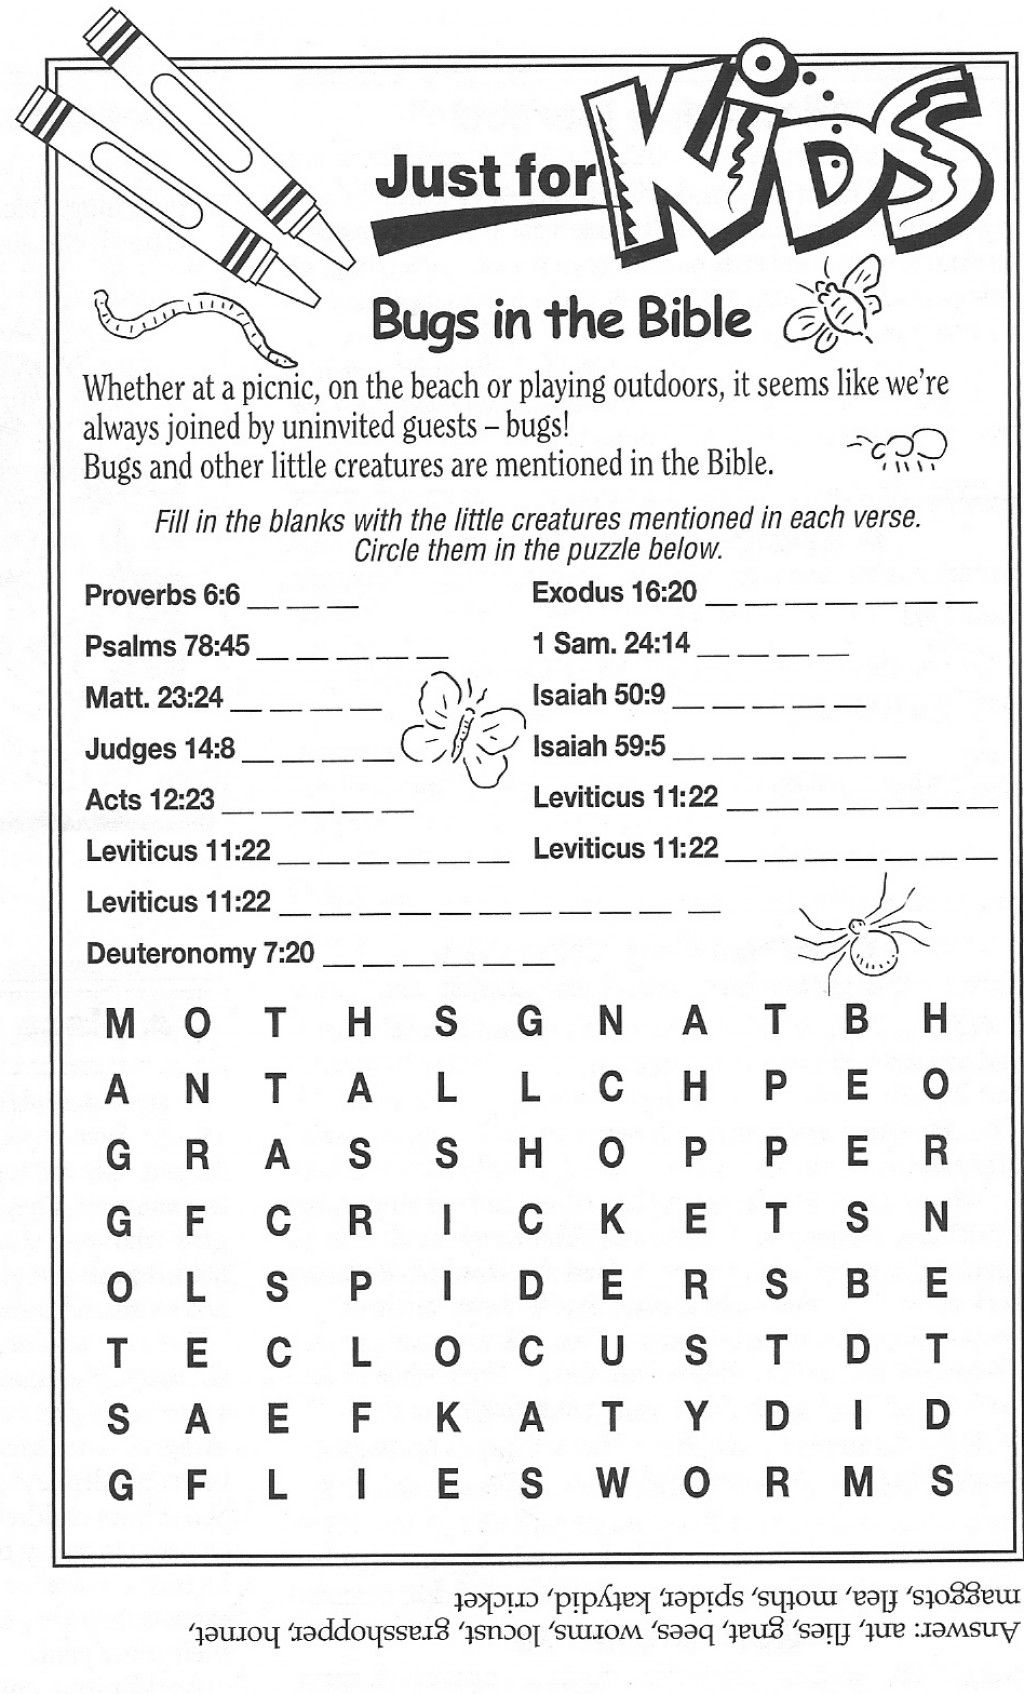 Online Bible Word Search Printable Pages | Religion | Bible For Kids - Printable Bible Puzzles For Preschoolers